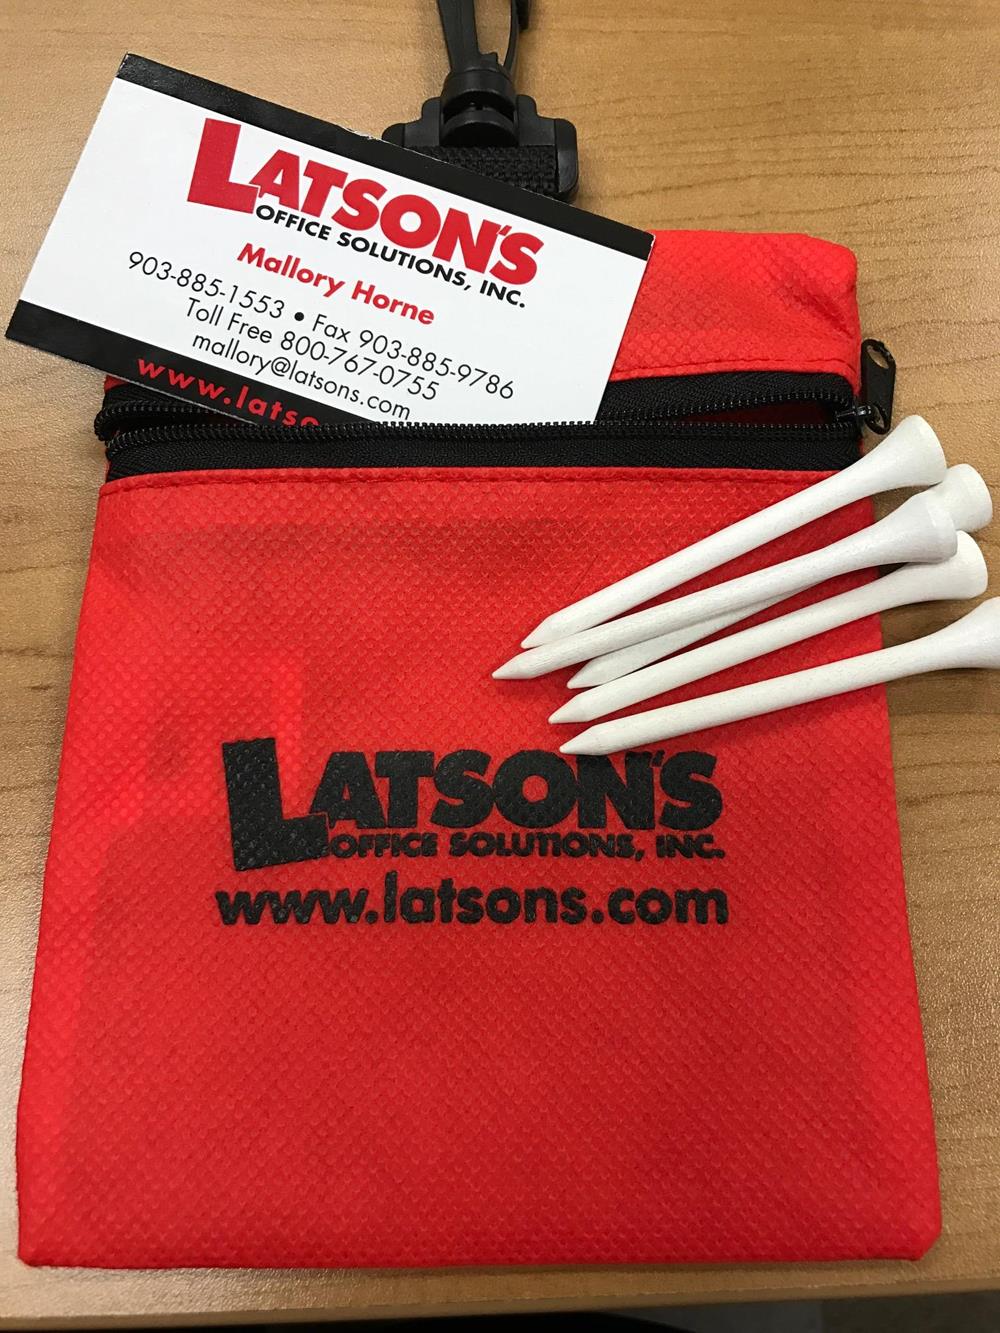 a bag with golf tees and a business card